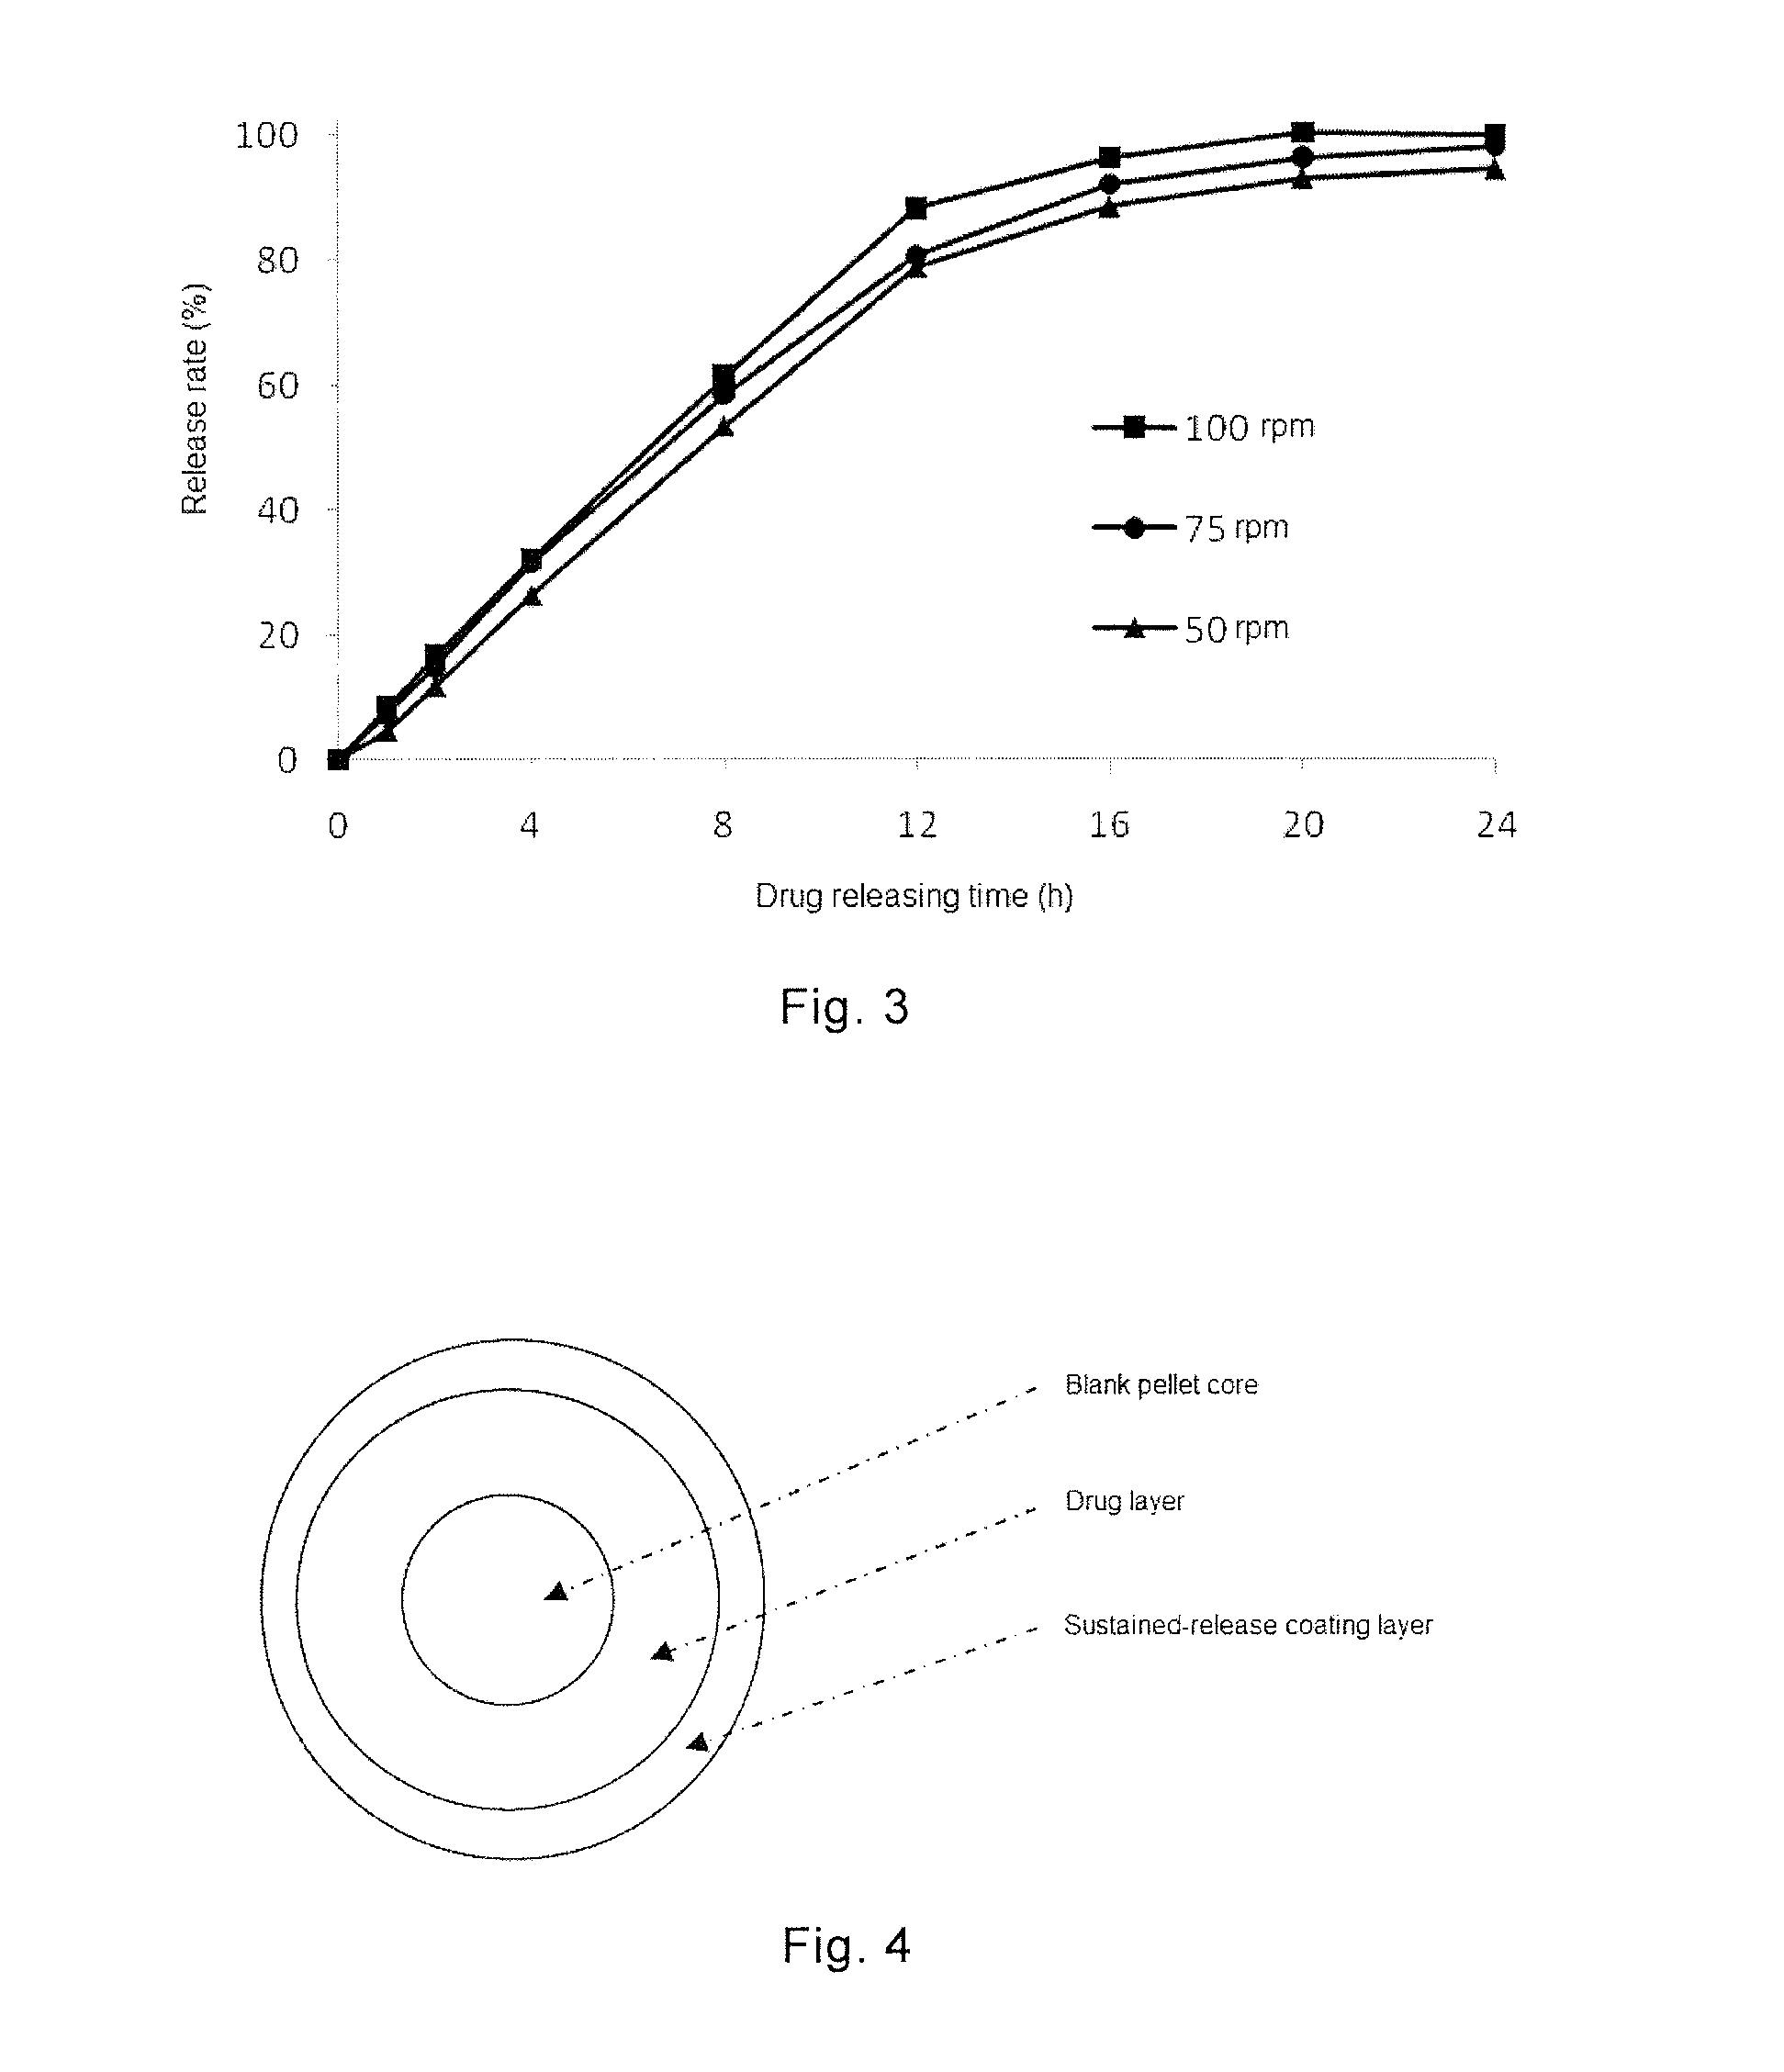 Combination Product Comprising Phentermine and Topiramate, and Preparation Method Thereof